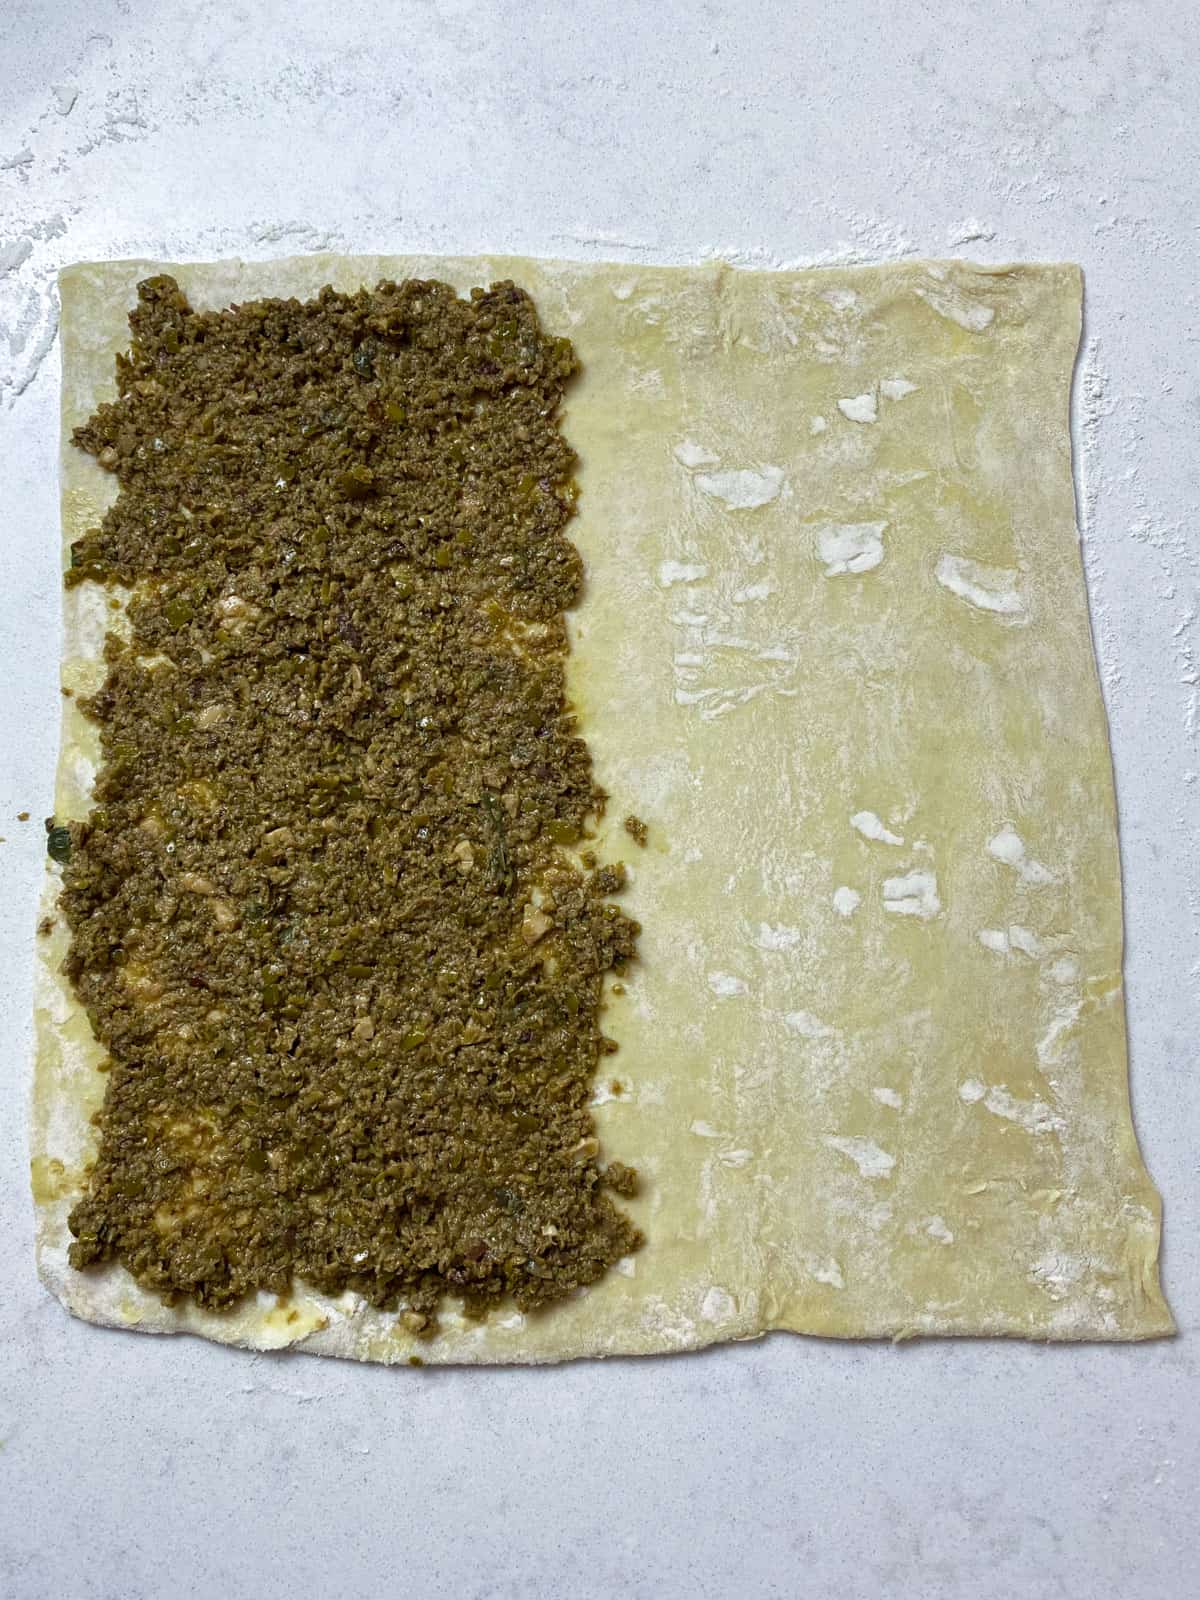 Spread a thin layer of olive tapenade onto half of the puff pastry sheet.